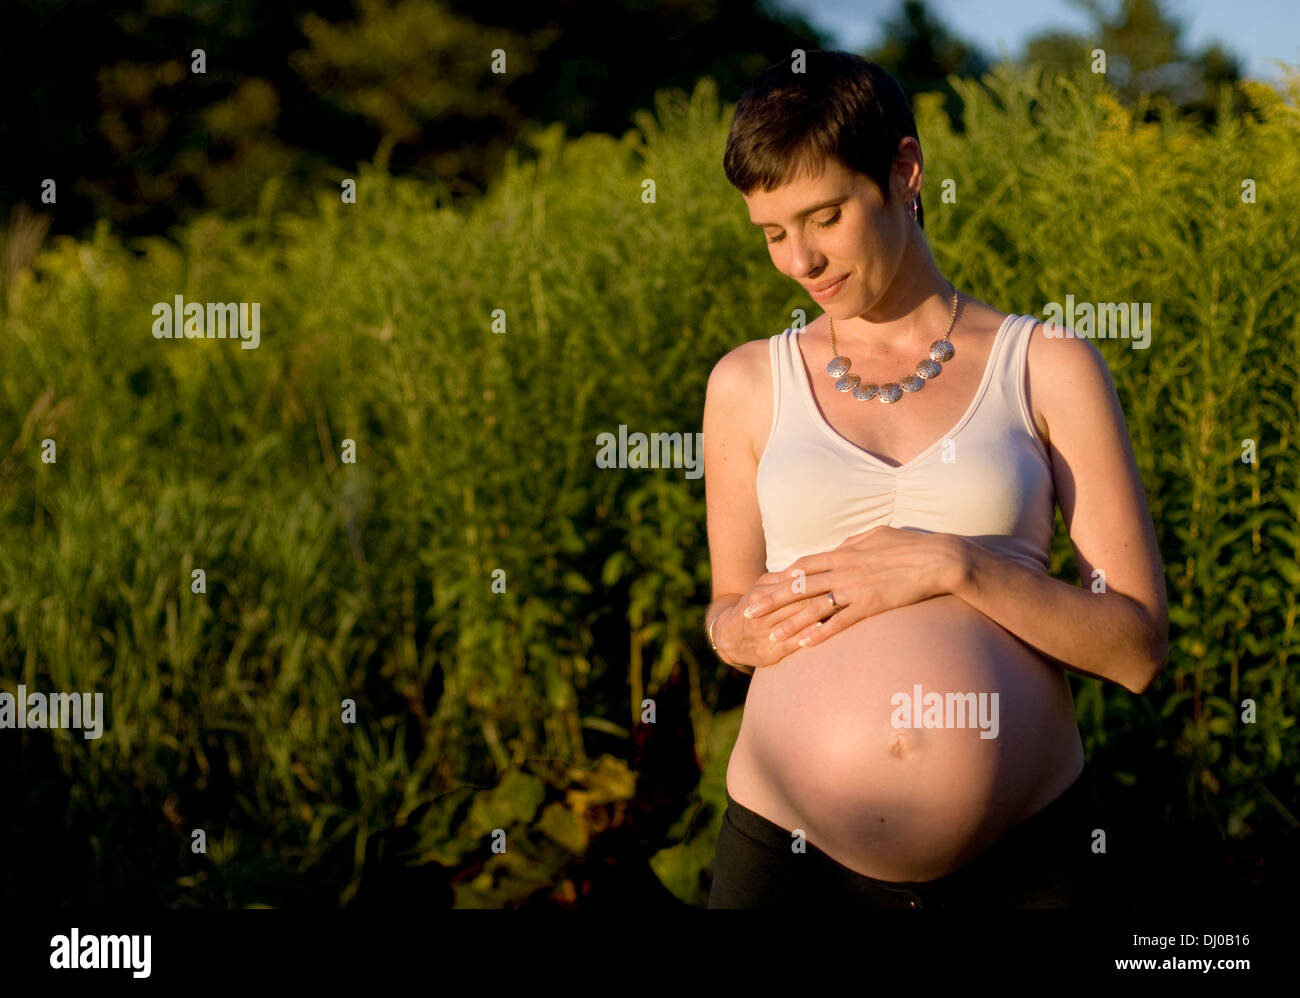 A nine-months pregnant Caucasian woman with short brown hair smiles softly in a field in late summer. Stock Photo